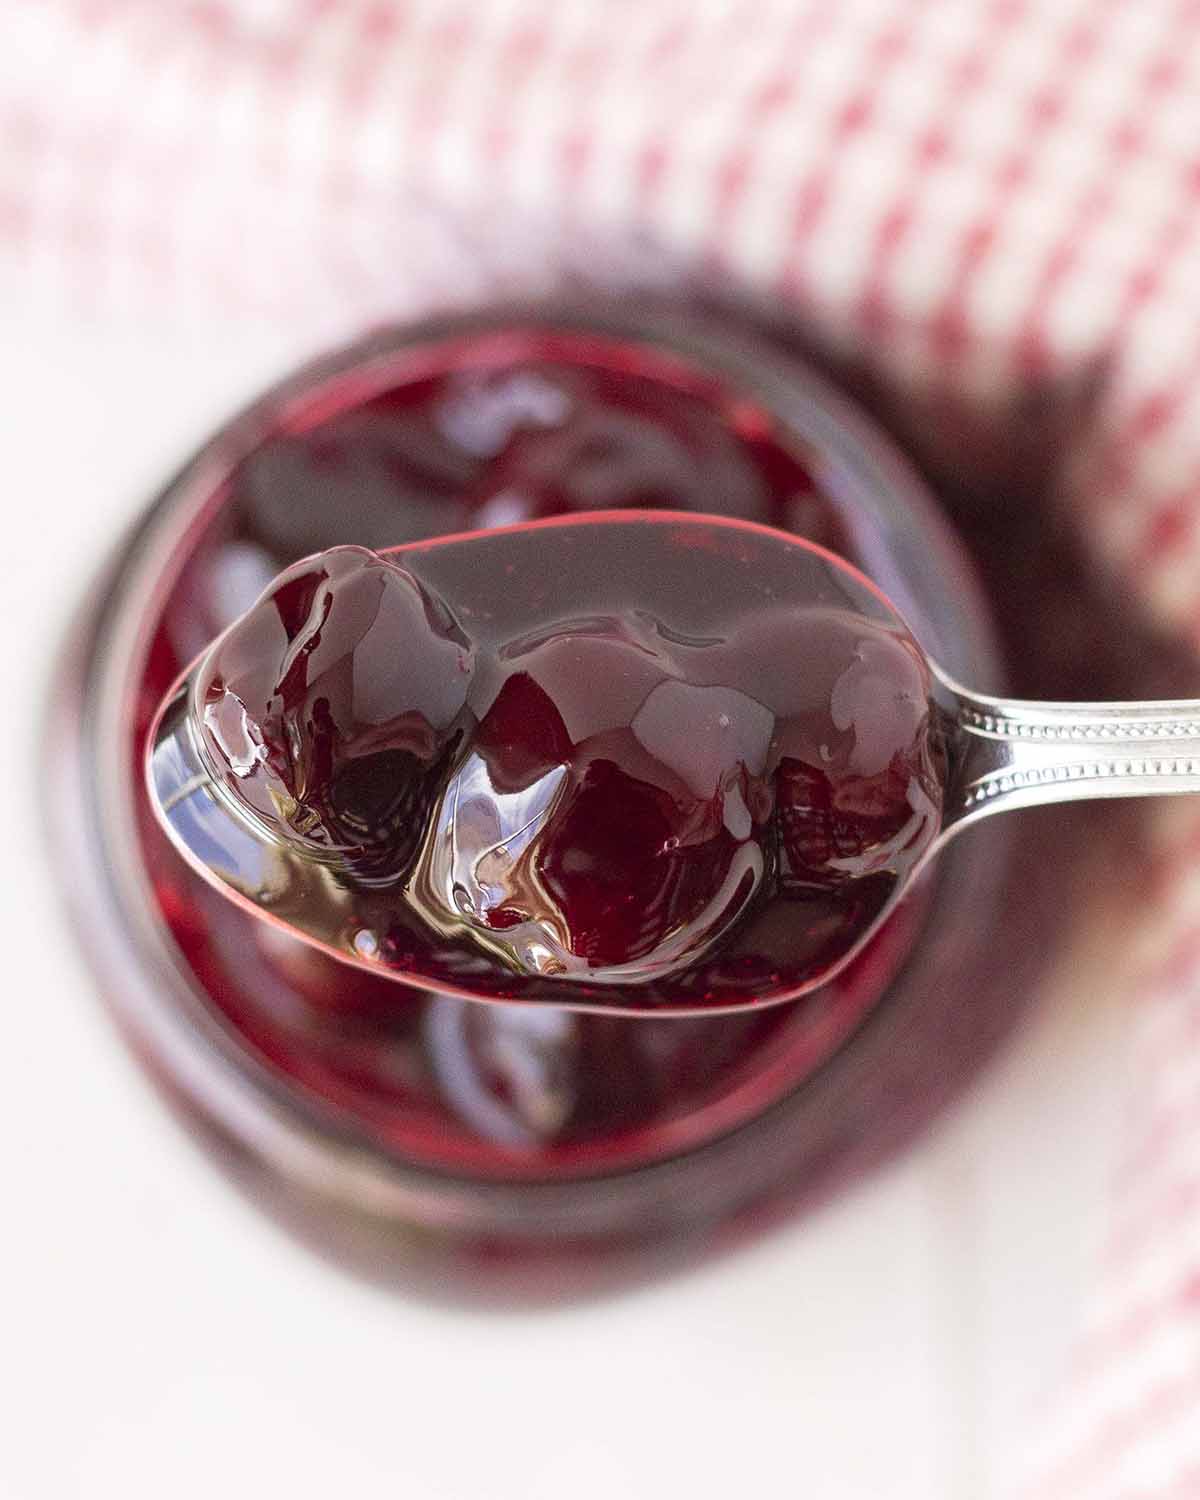 A close up shot of a spoon filled with cherry topping.